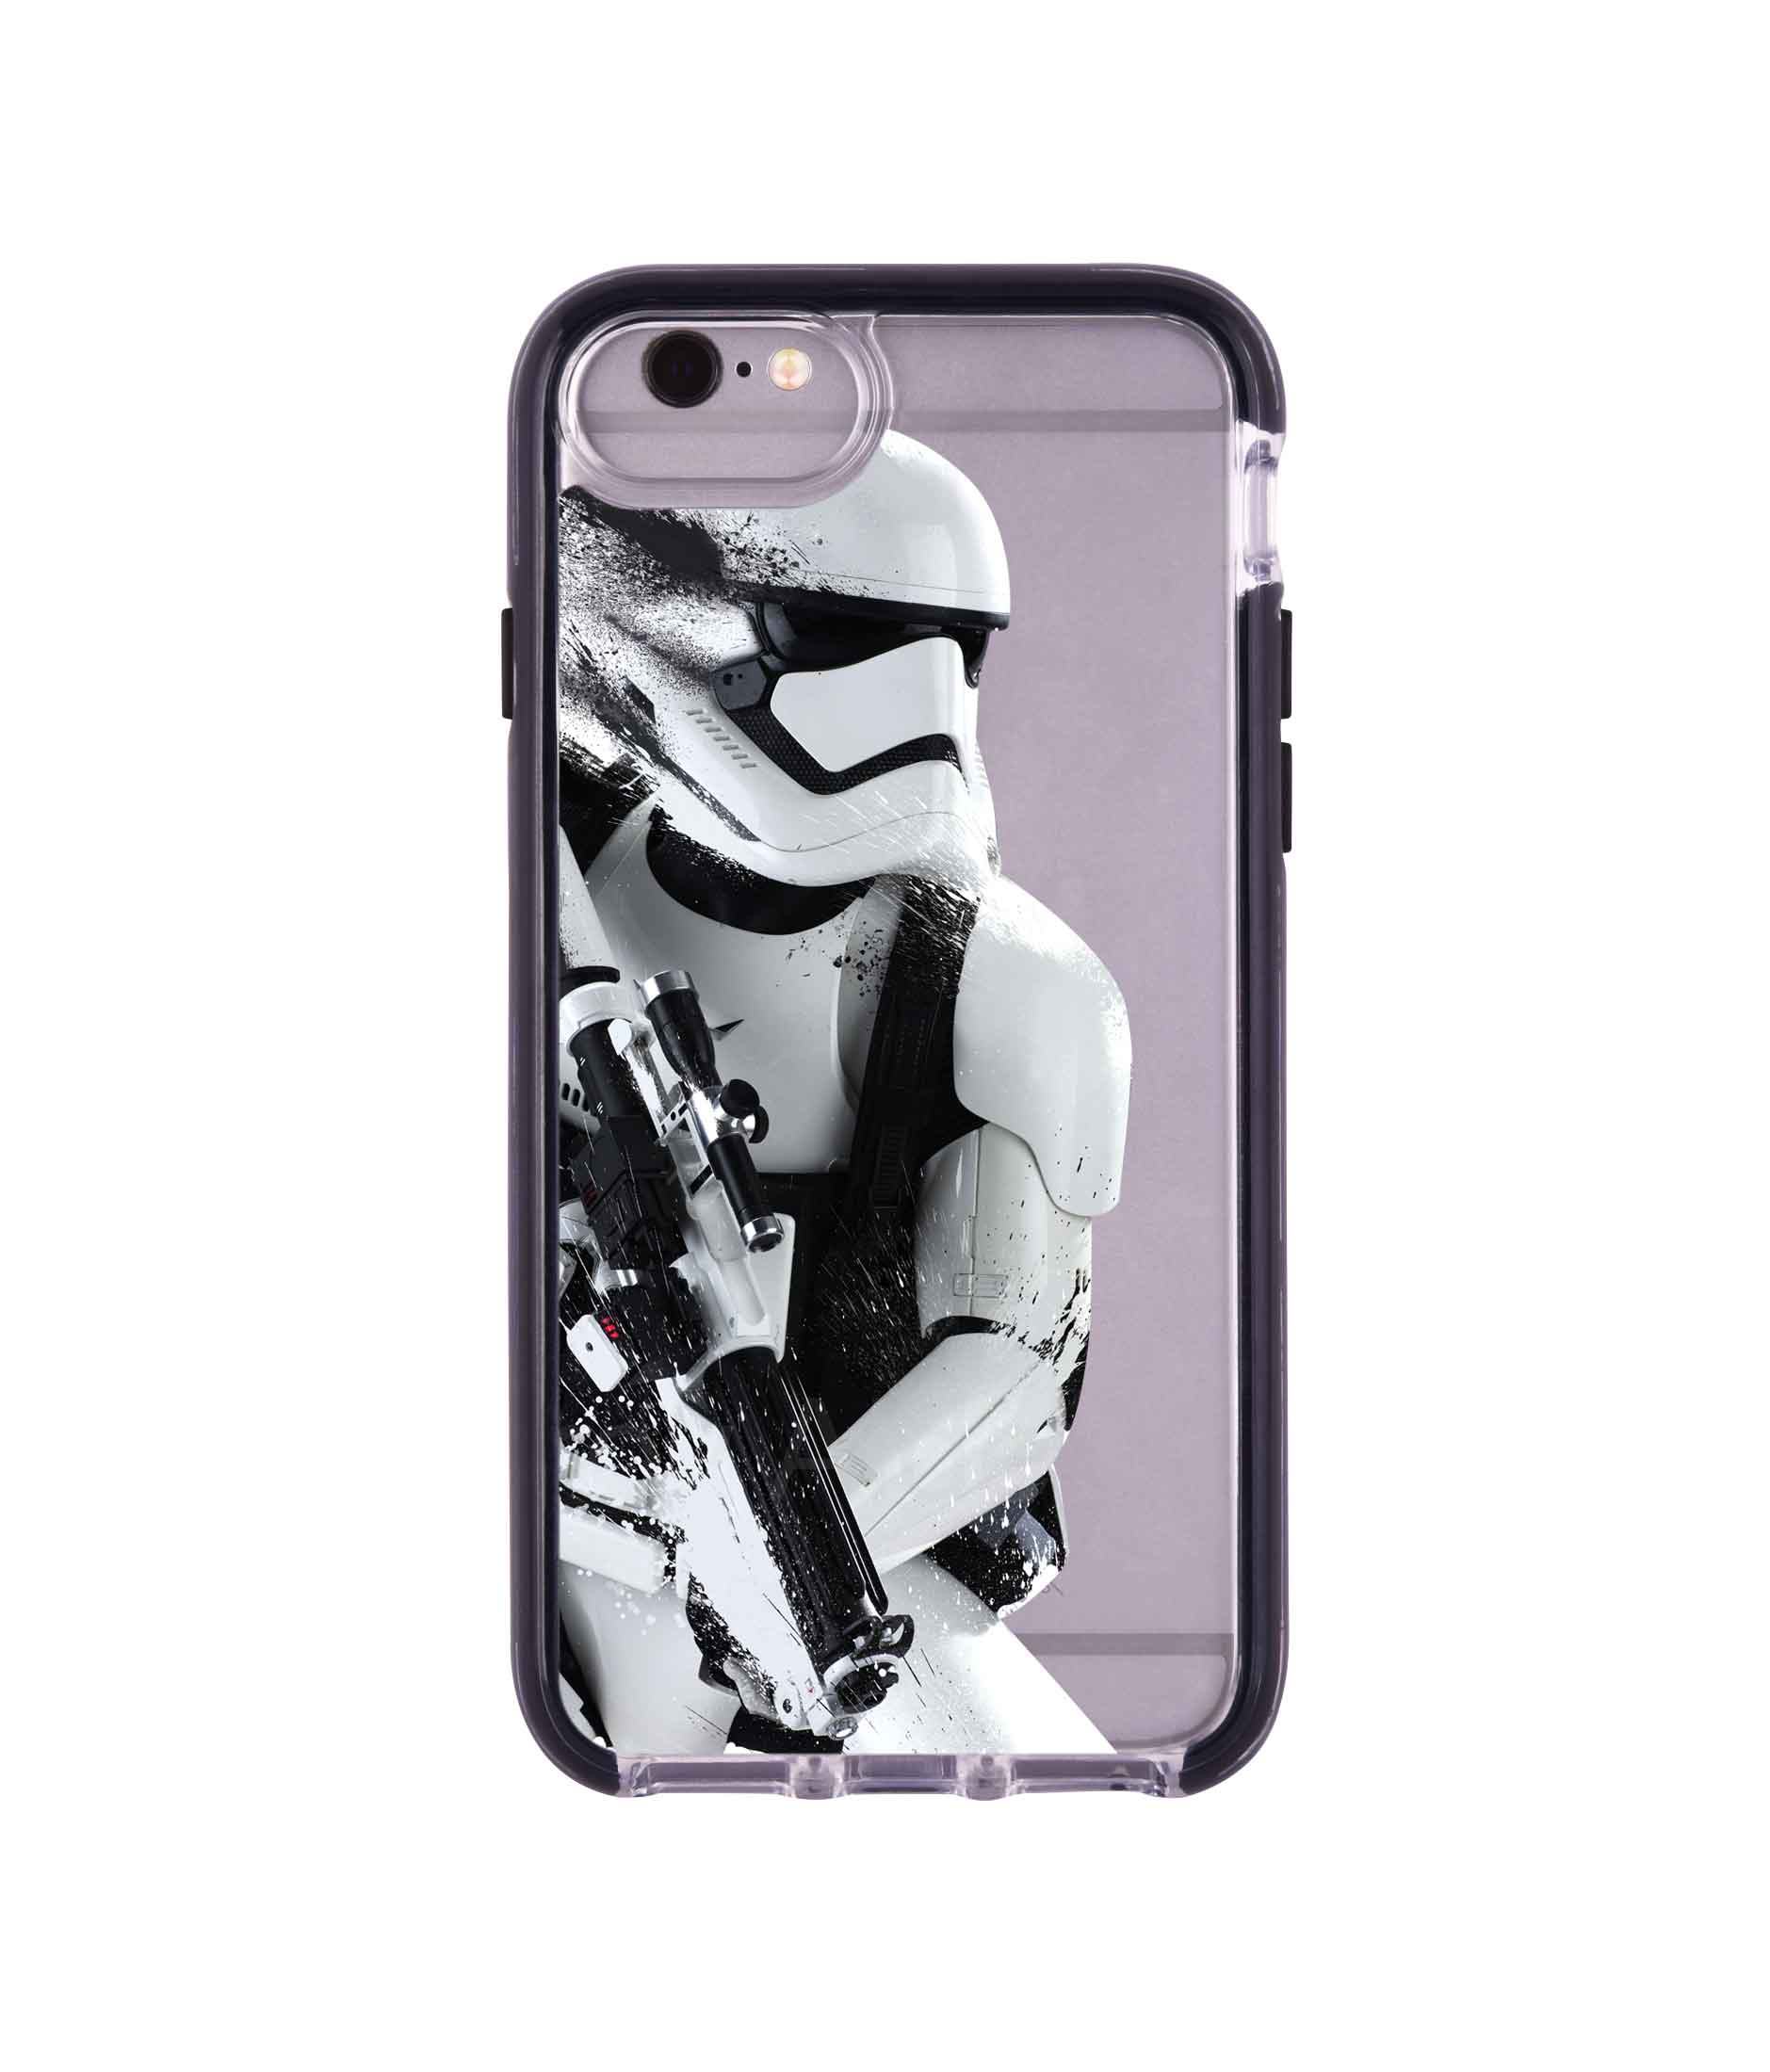 Trooper Storm - Extreme Phone Case for iPhone 6